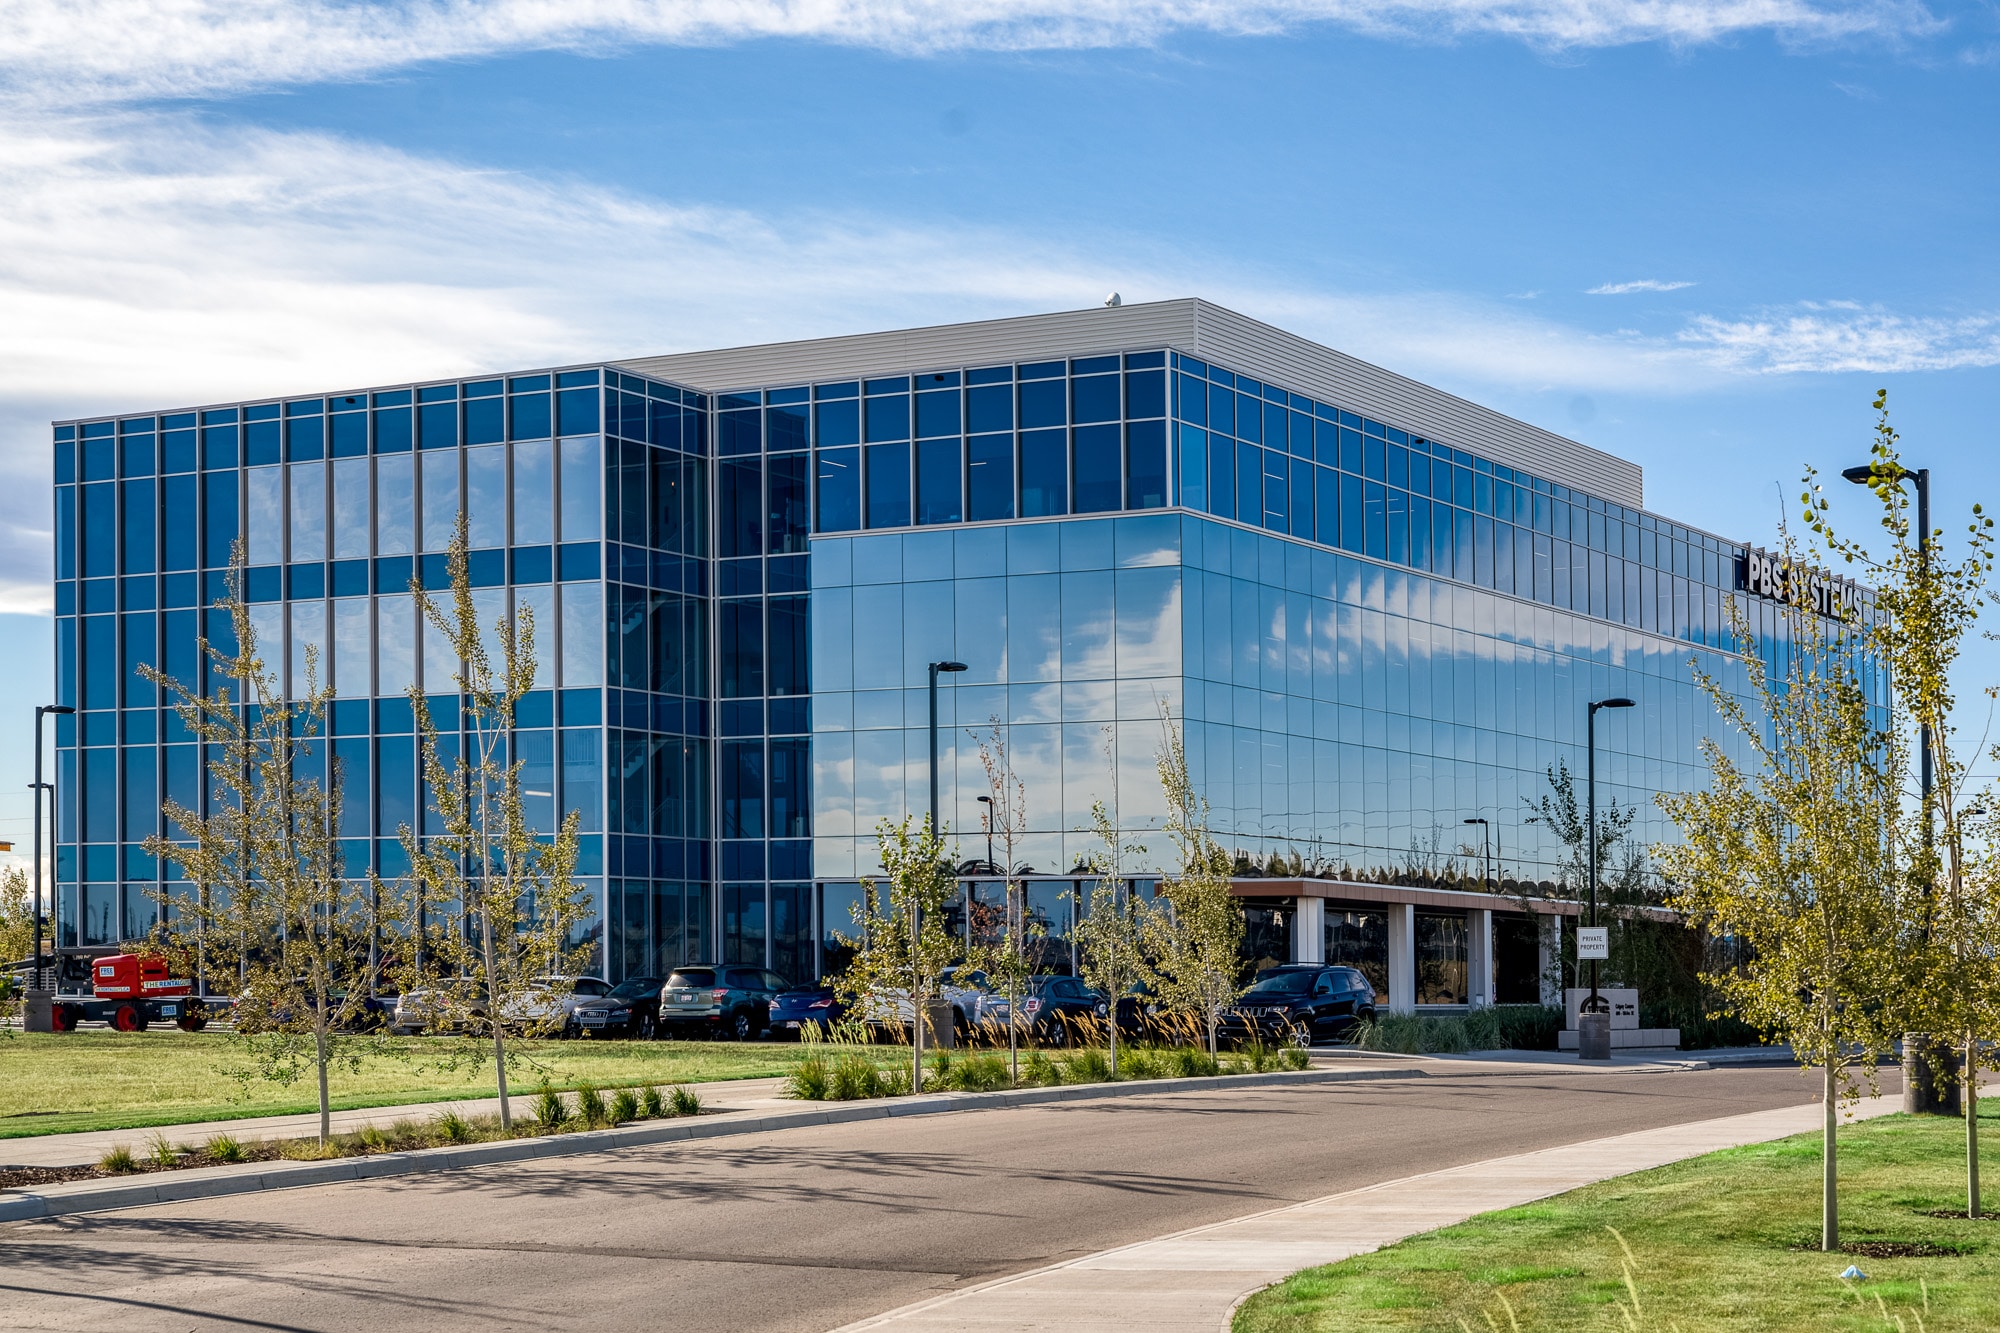 CMC Commercial Glazing - PBS Financial Systems (Shepard Station Building 1)